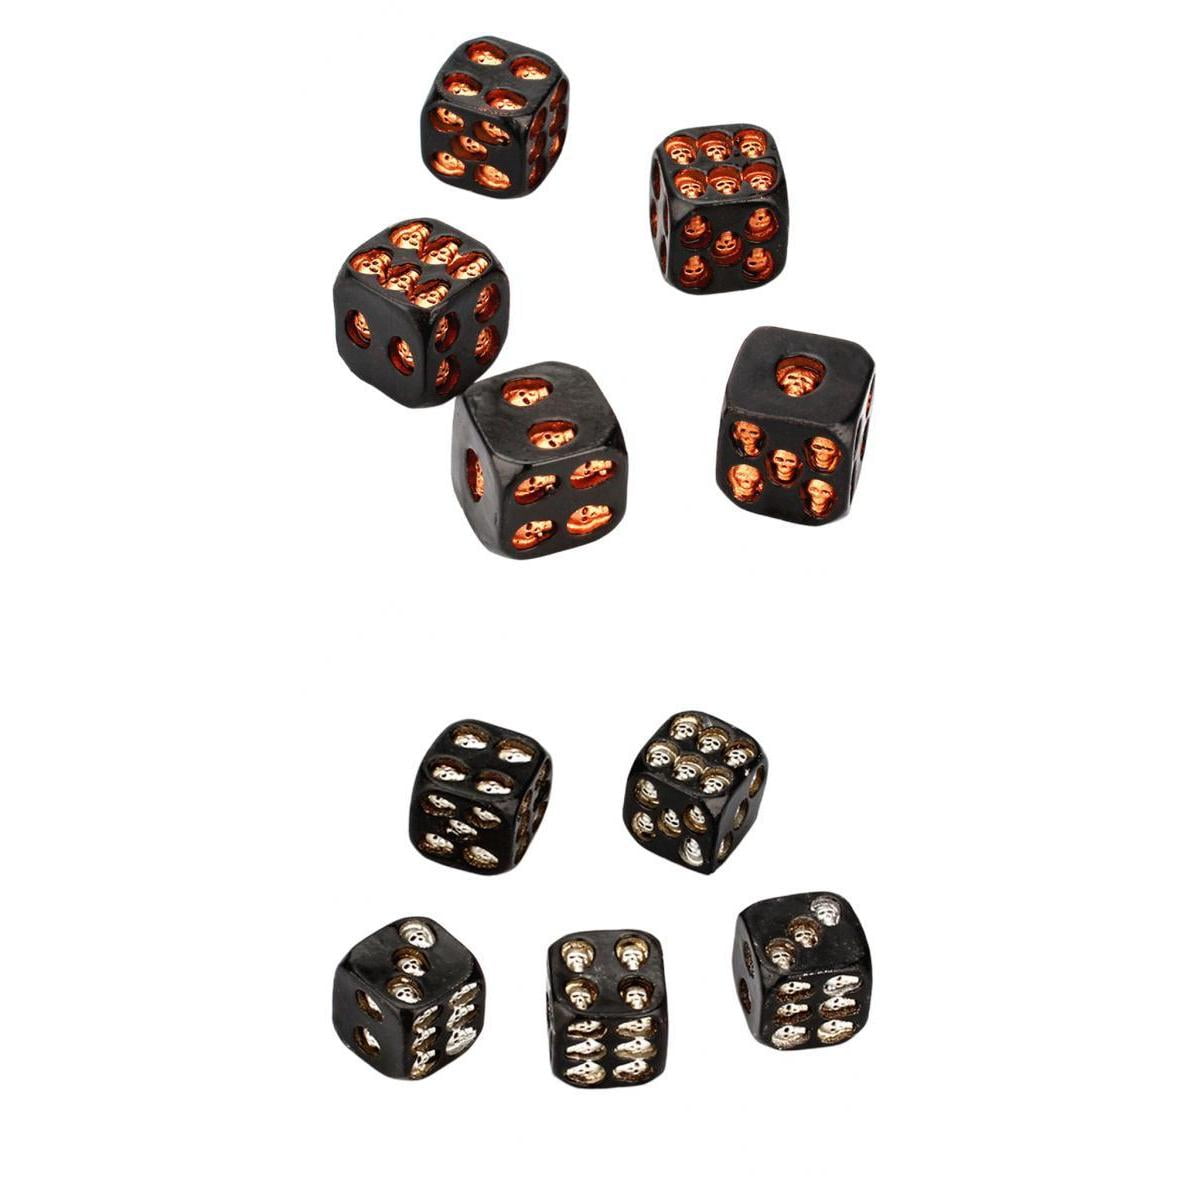 Cool Skull Dice 6-Sided KTV Bar Party Entertainment Game Pool Leisure Toys 